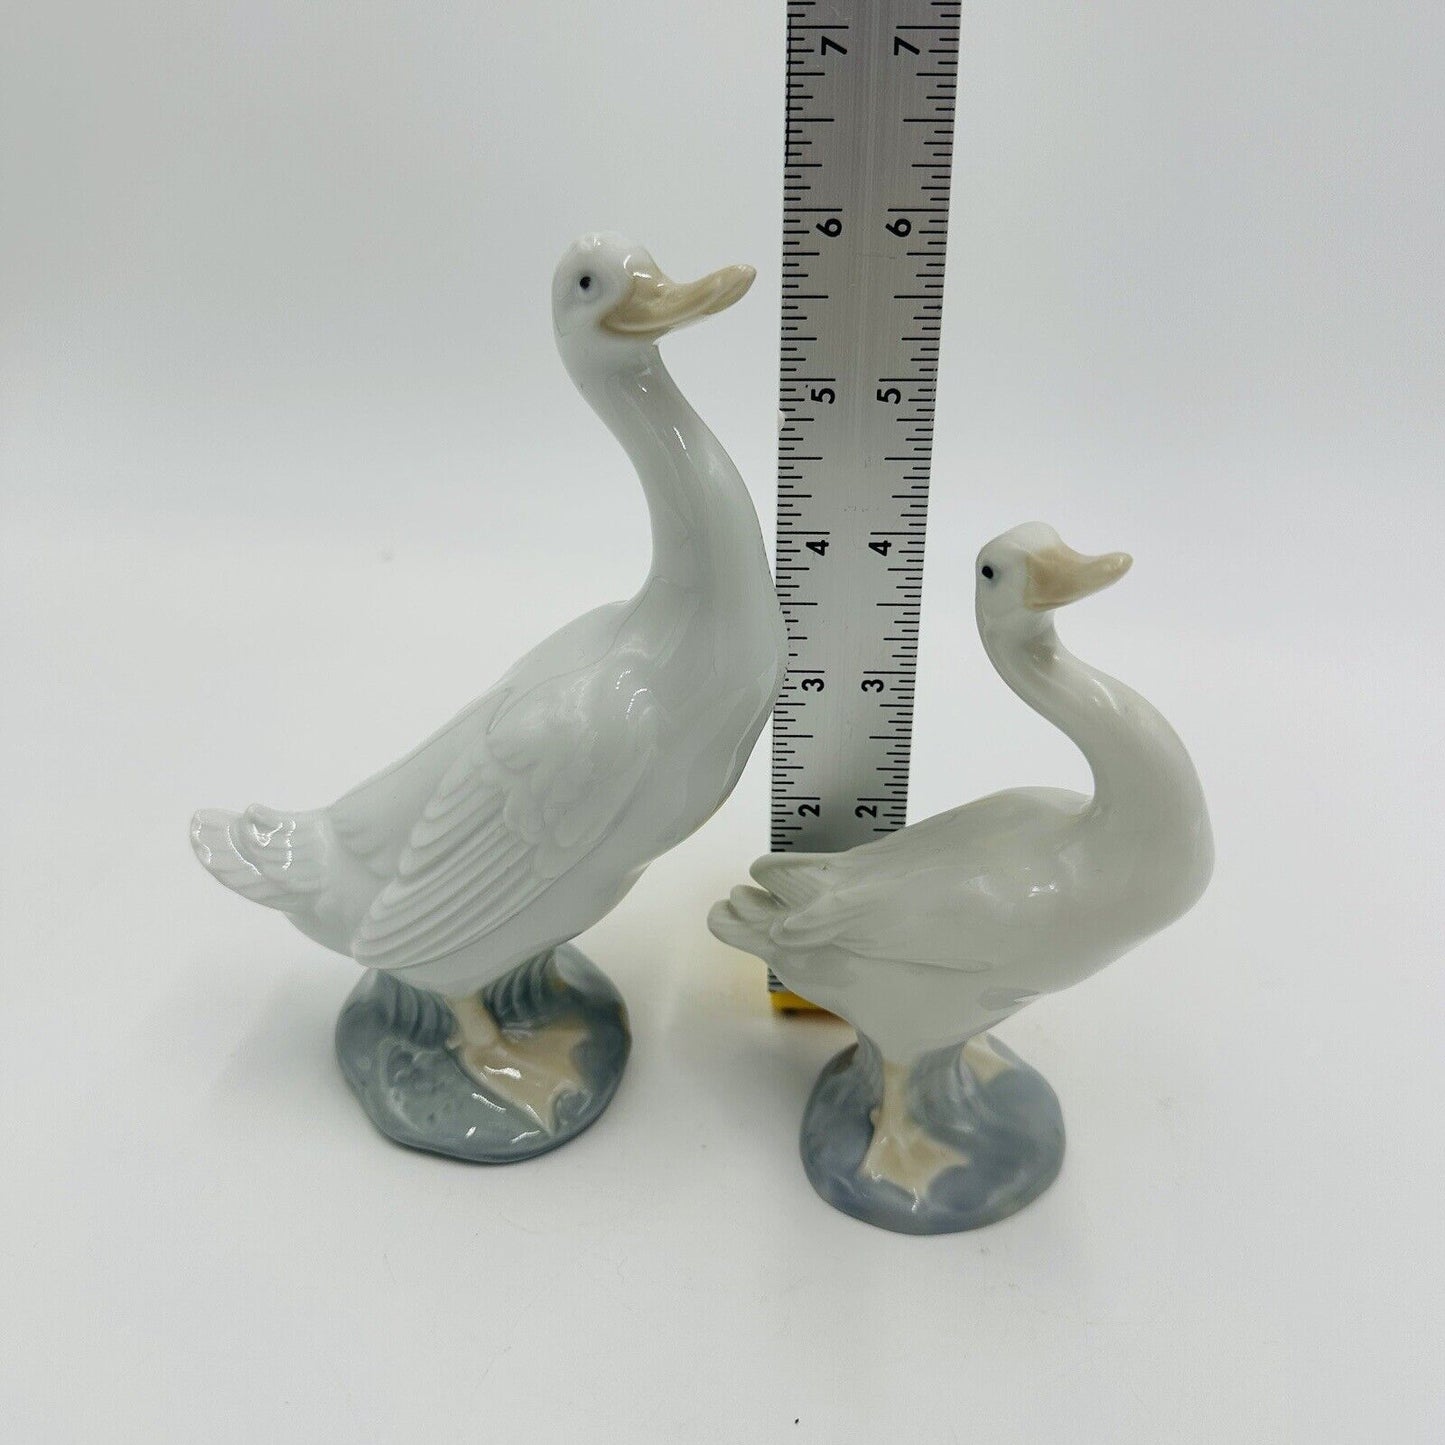 Lladro & Nao Porcelain Ducks Figurines Retired Made In Spain Vintage Glossy Whit